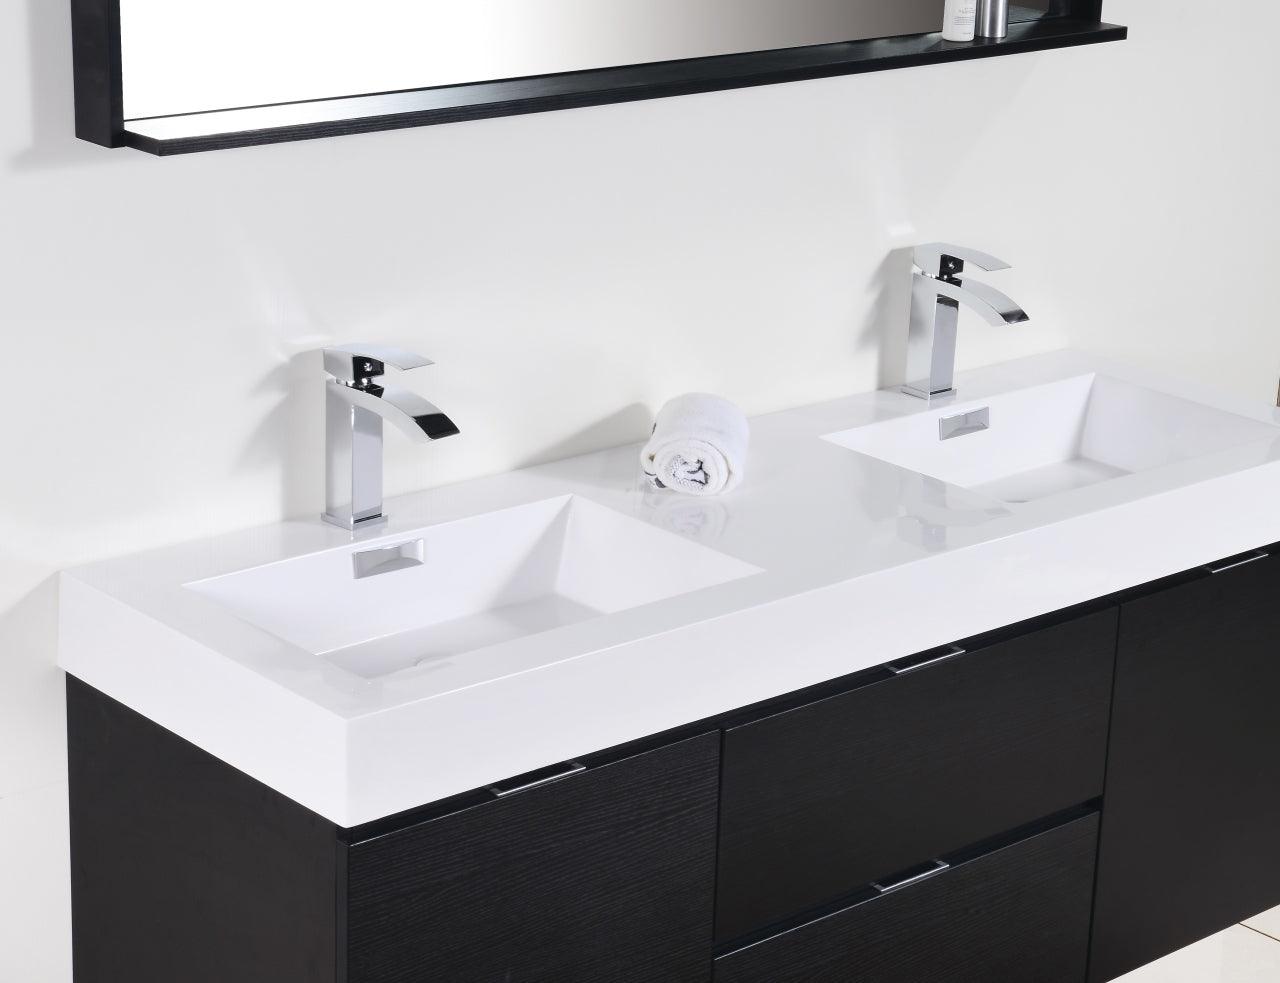 Bliss 60" Double Sink Wall Mount Modern Bathroom Vanity - Home and Bath Depot